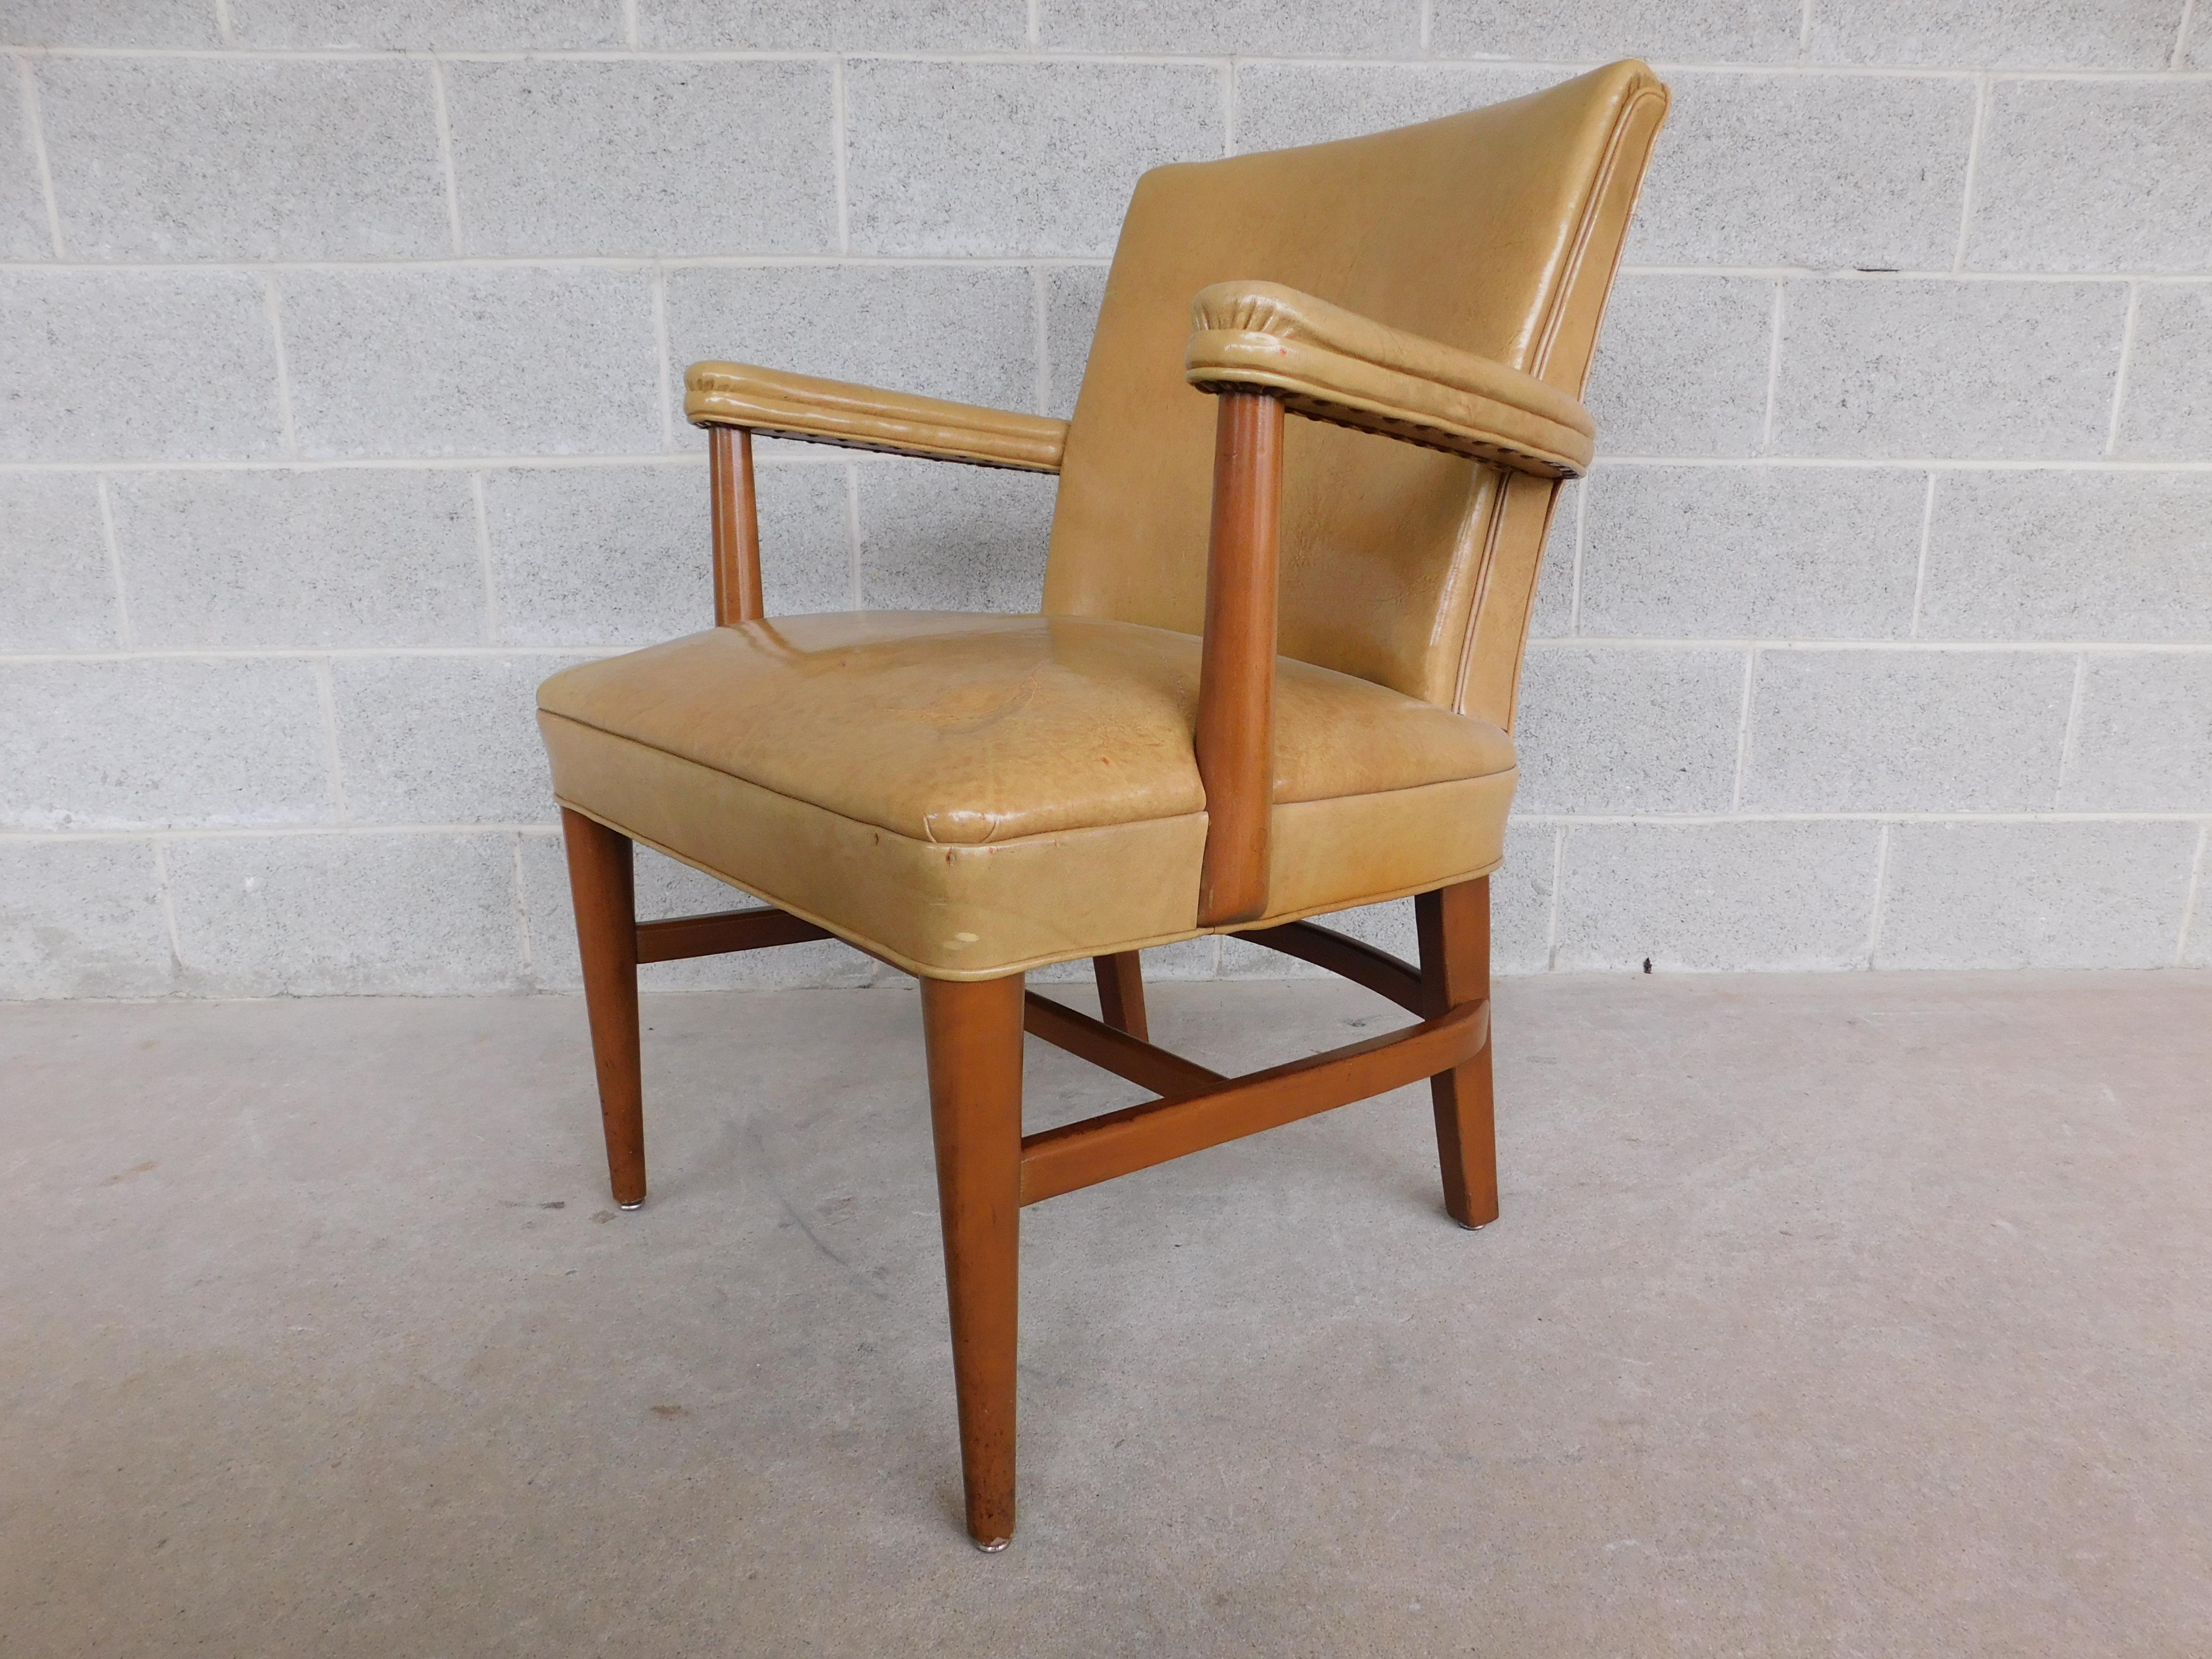 Original Vintage Mid-Century Modern Gunlocke leather conference office chairs set of - 8. With Traditional & Mid-Century Modern Design Combined. Modern elements on the stretcher hardwood base, original comfortable cushion springs along with original